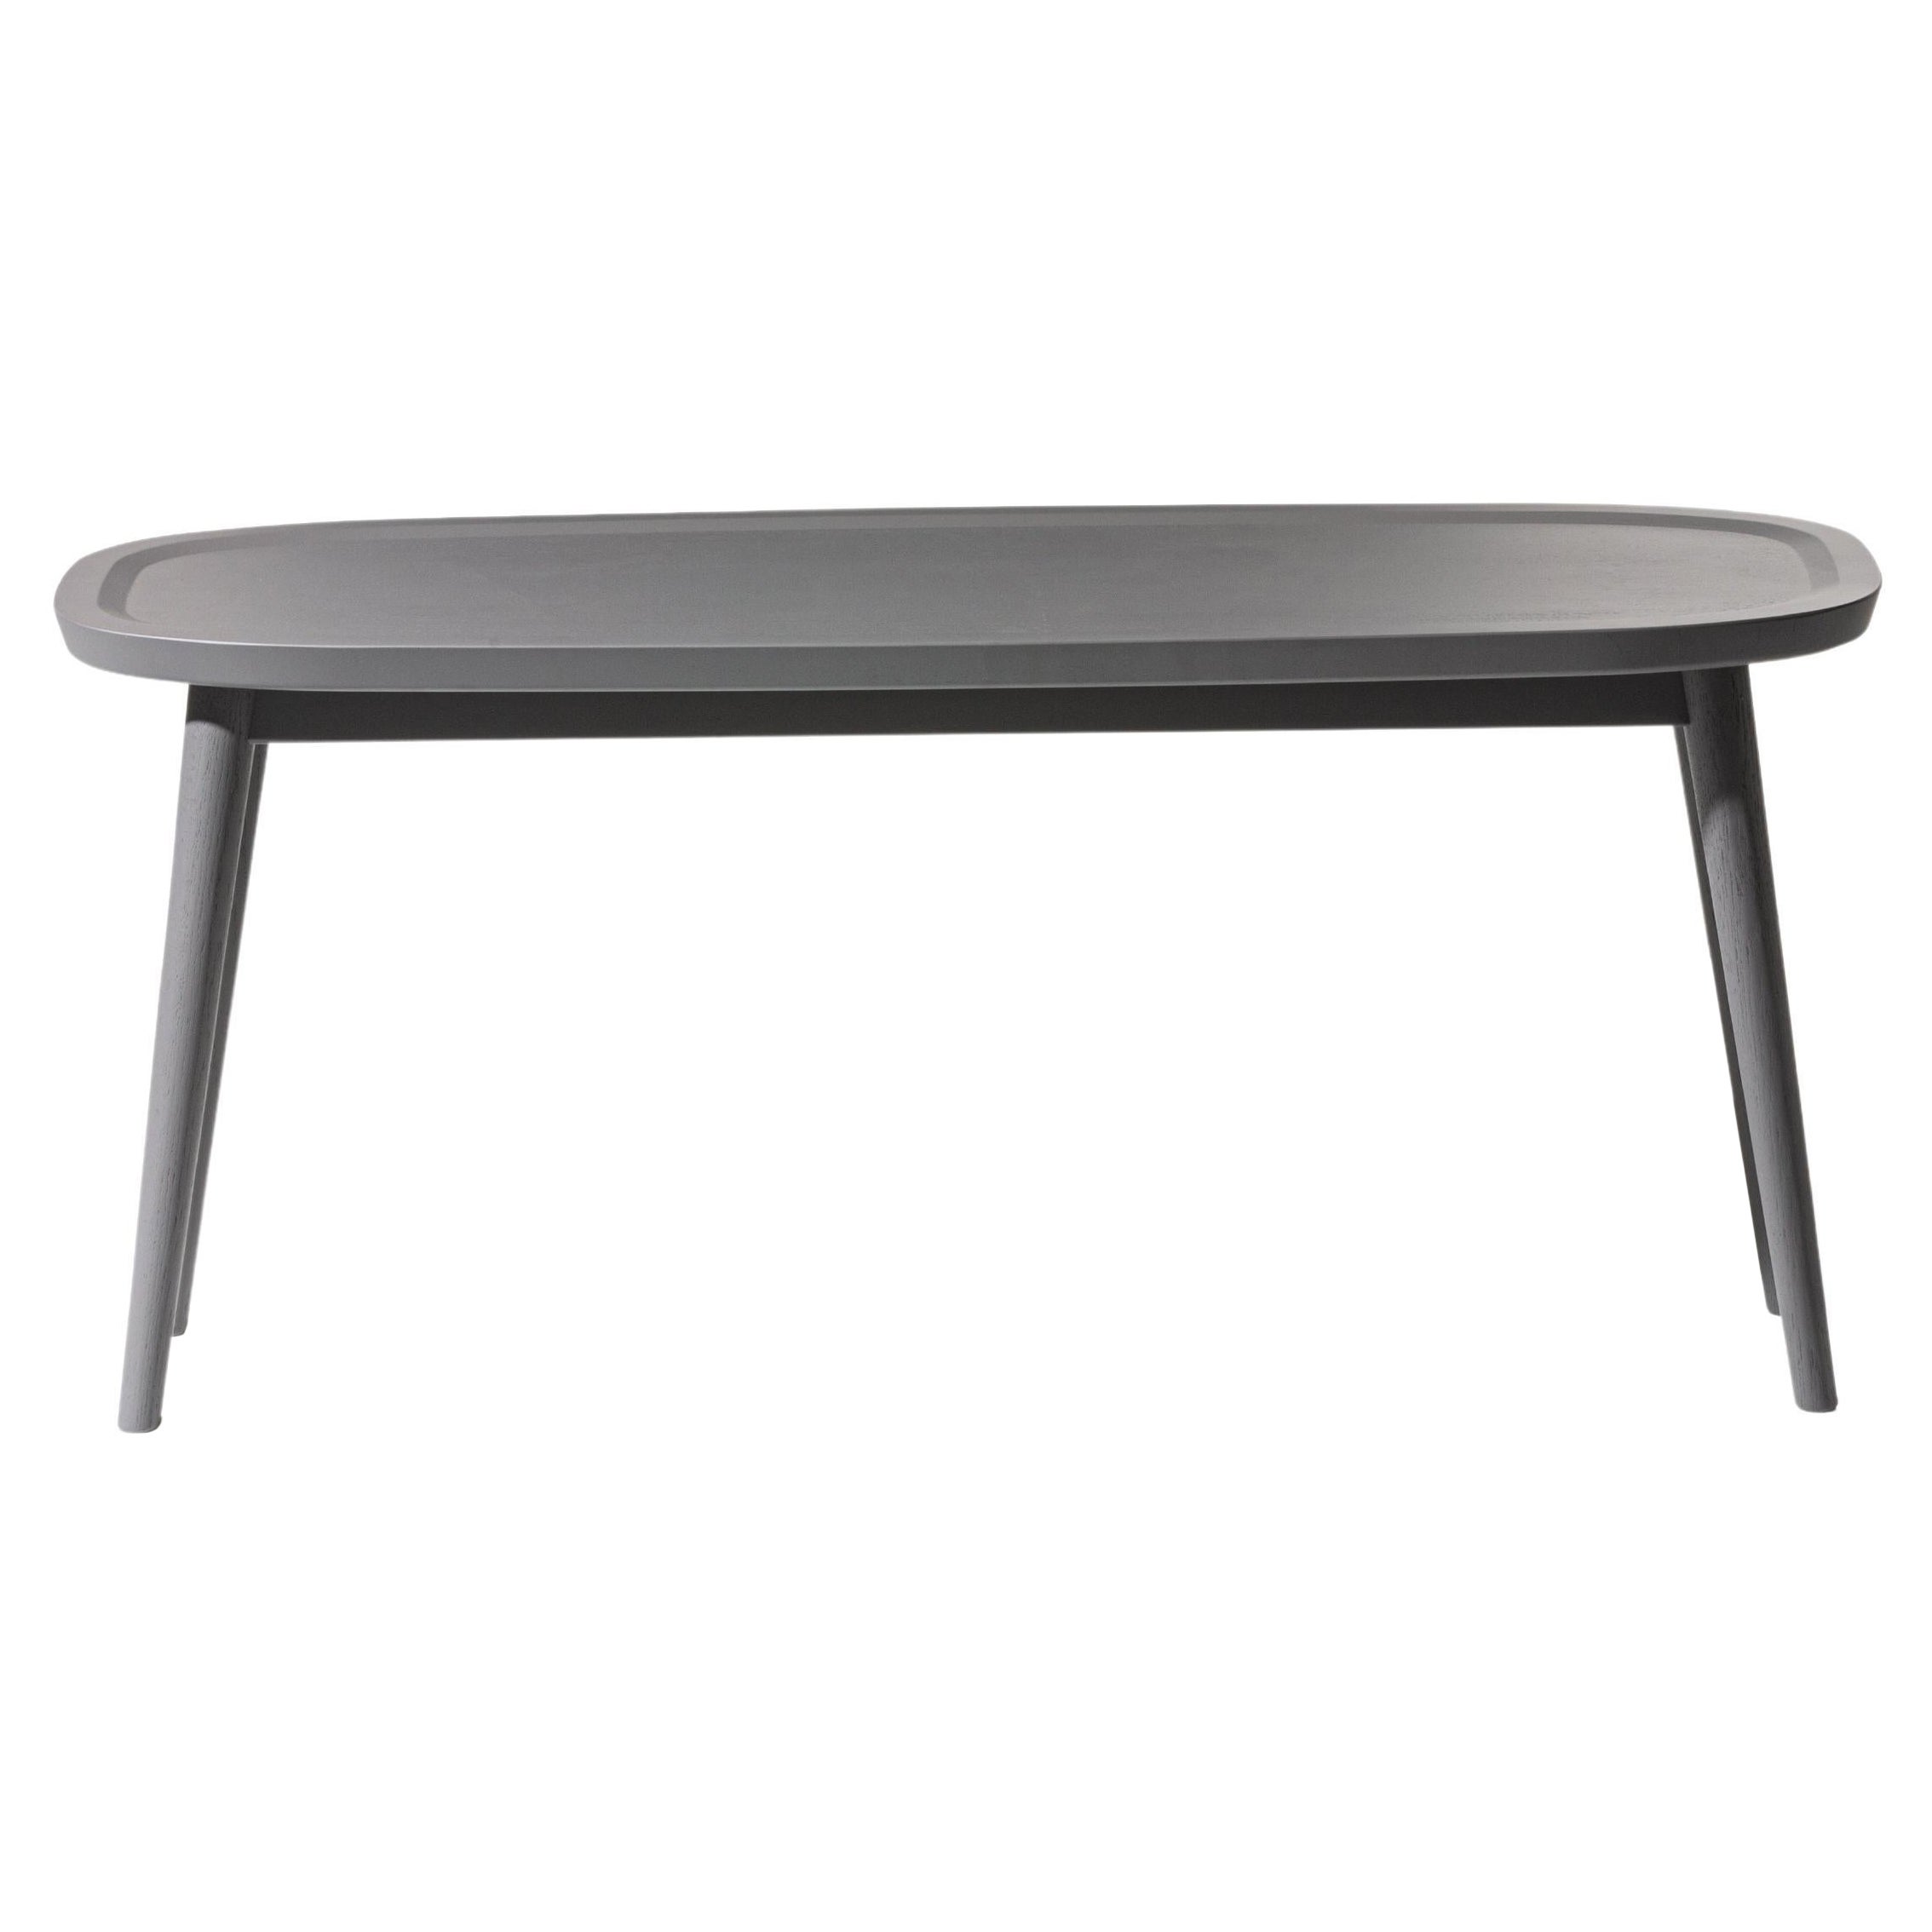 Gervasoni Small Brick Oval Coffee Table in Grey Lacquered Oak by Paola Navone For Sale